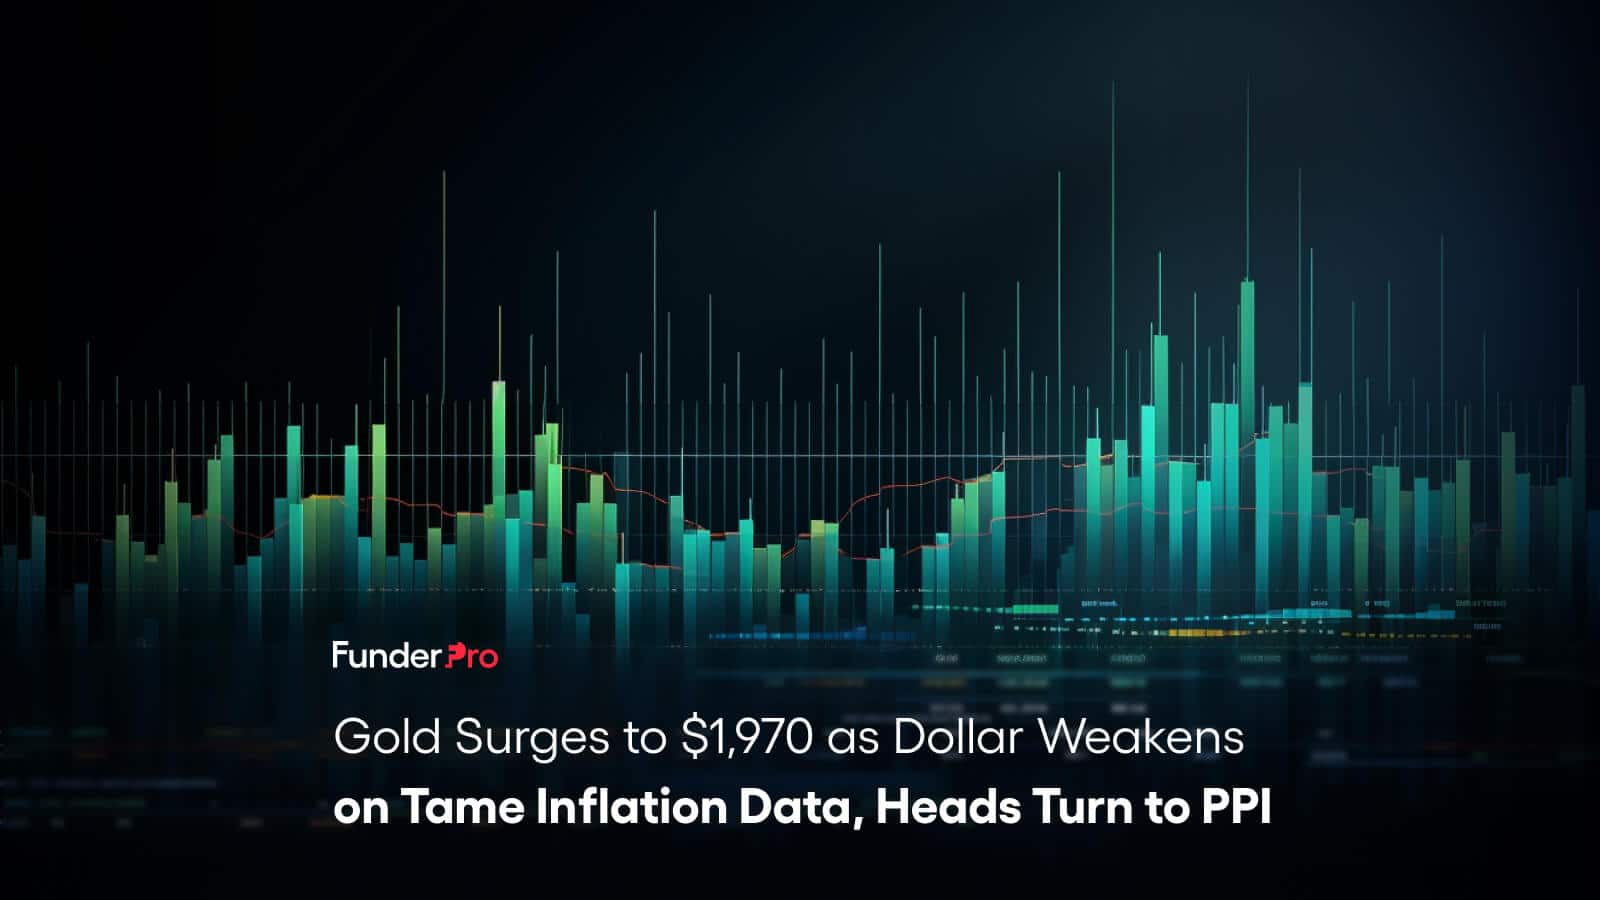 Gold Surges to $1,970 as Dollar Weakens on Tame Inflation Data, Heads Turn to PPI